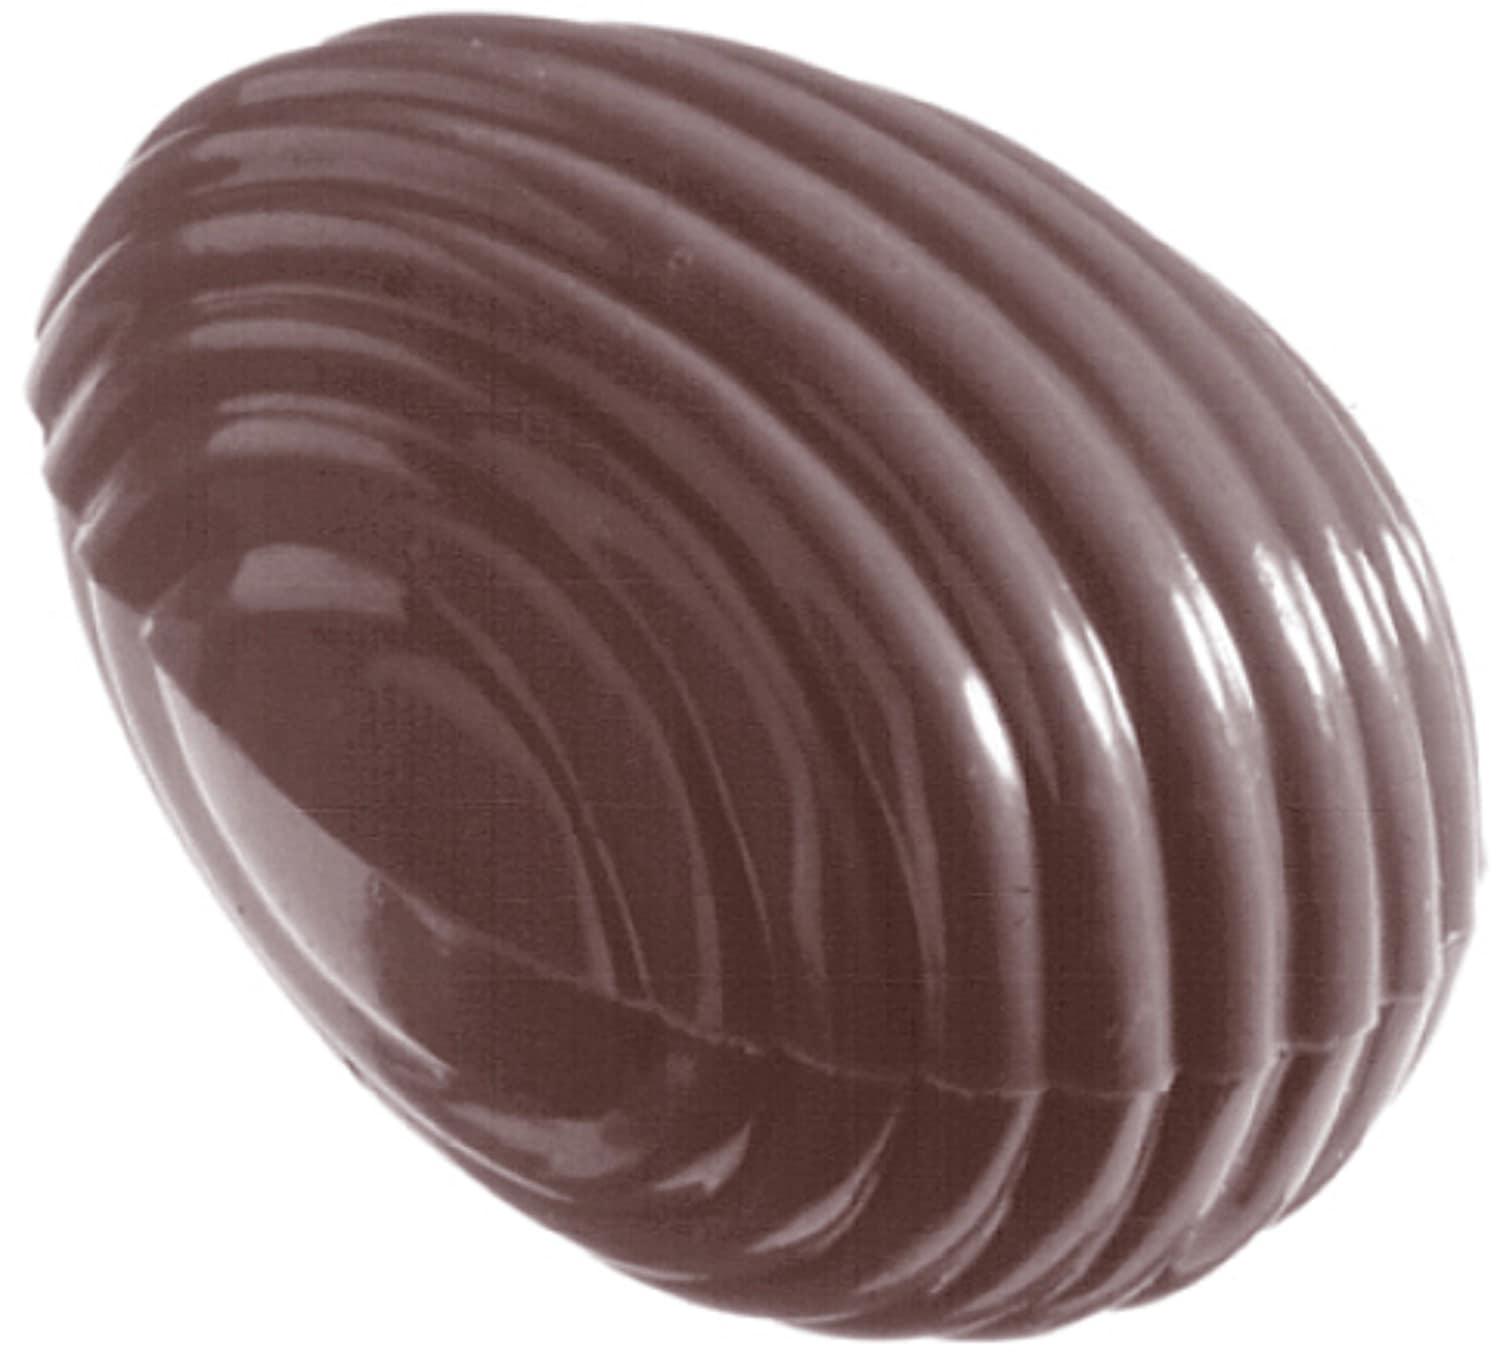 Chocolate mould "Easter egg" 421053